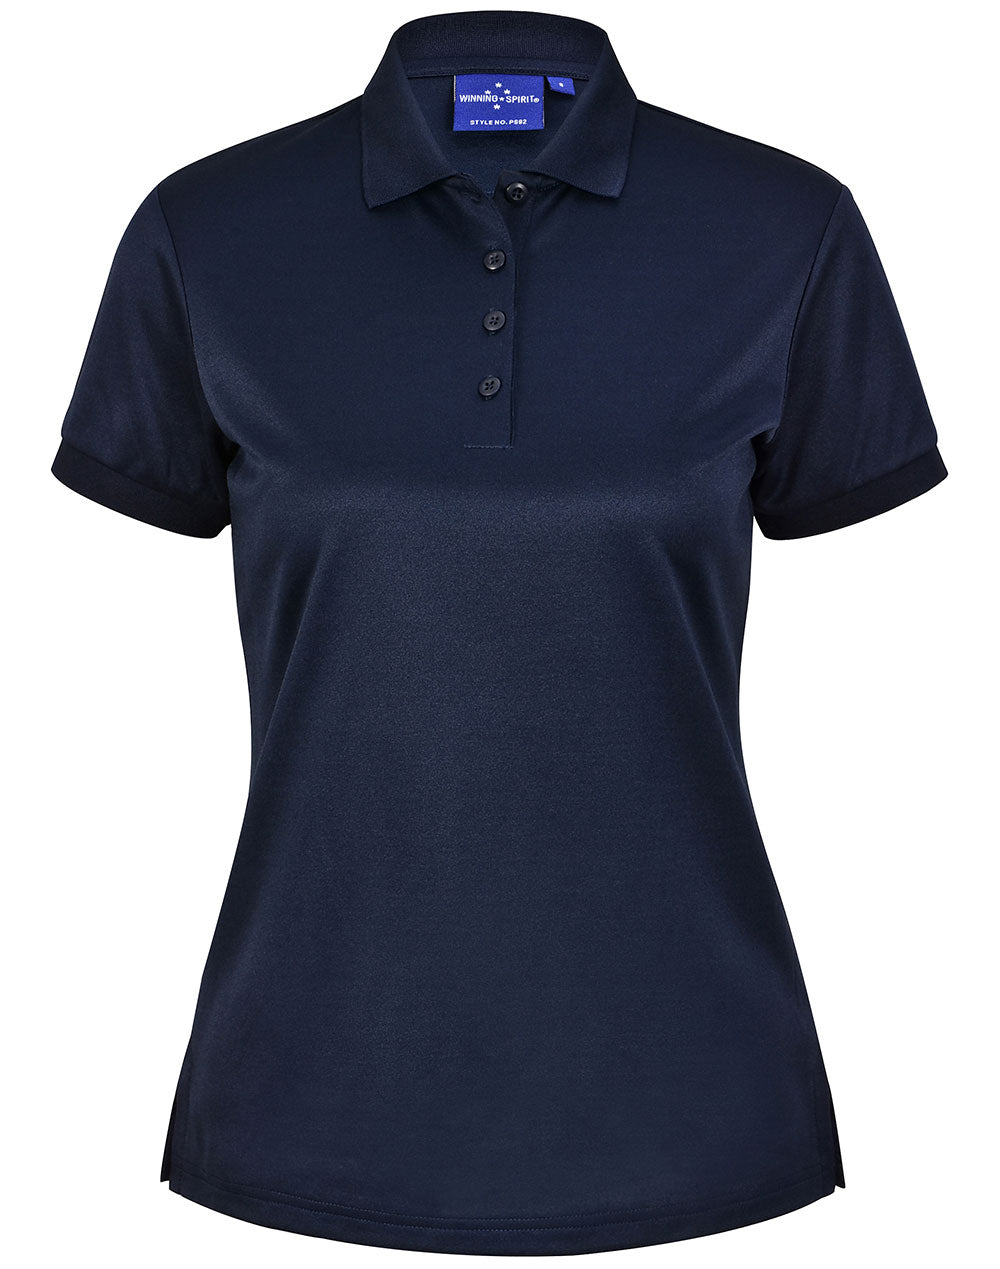 Winning Spirit Ladie's Sustainable Poly/Cotton Corporate Polo PS92 Casual Wear Winning Spirit Navy 8 